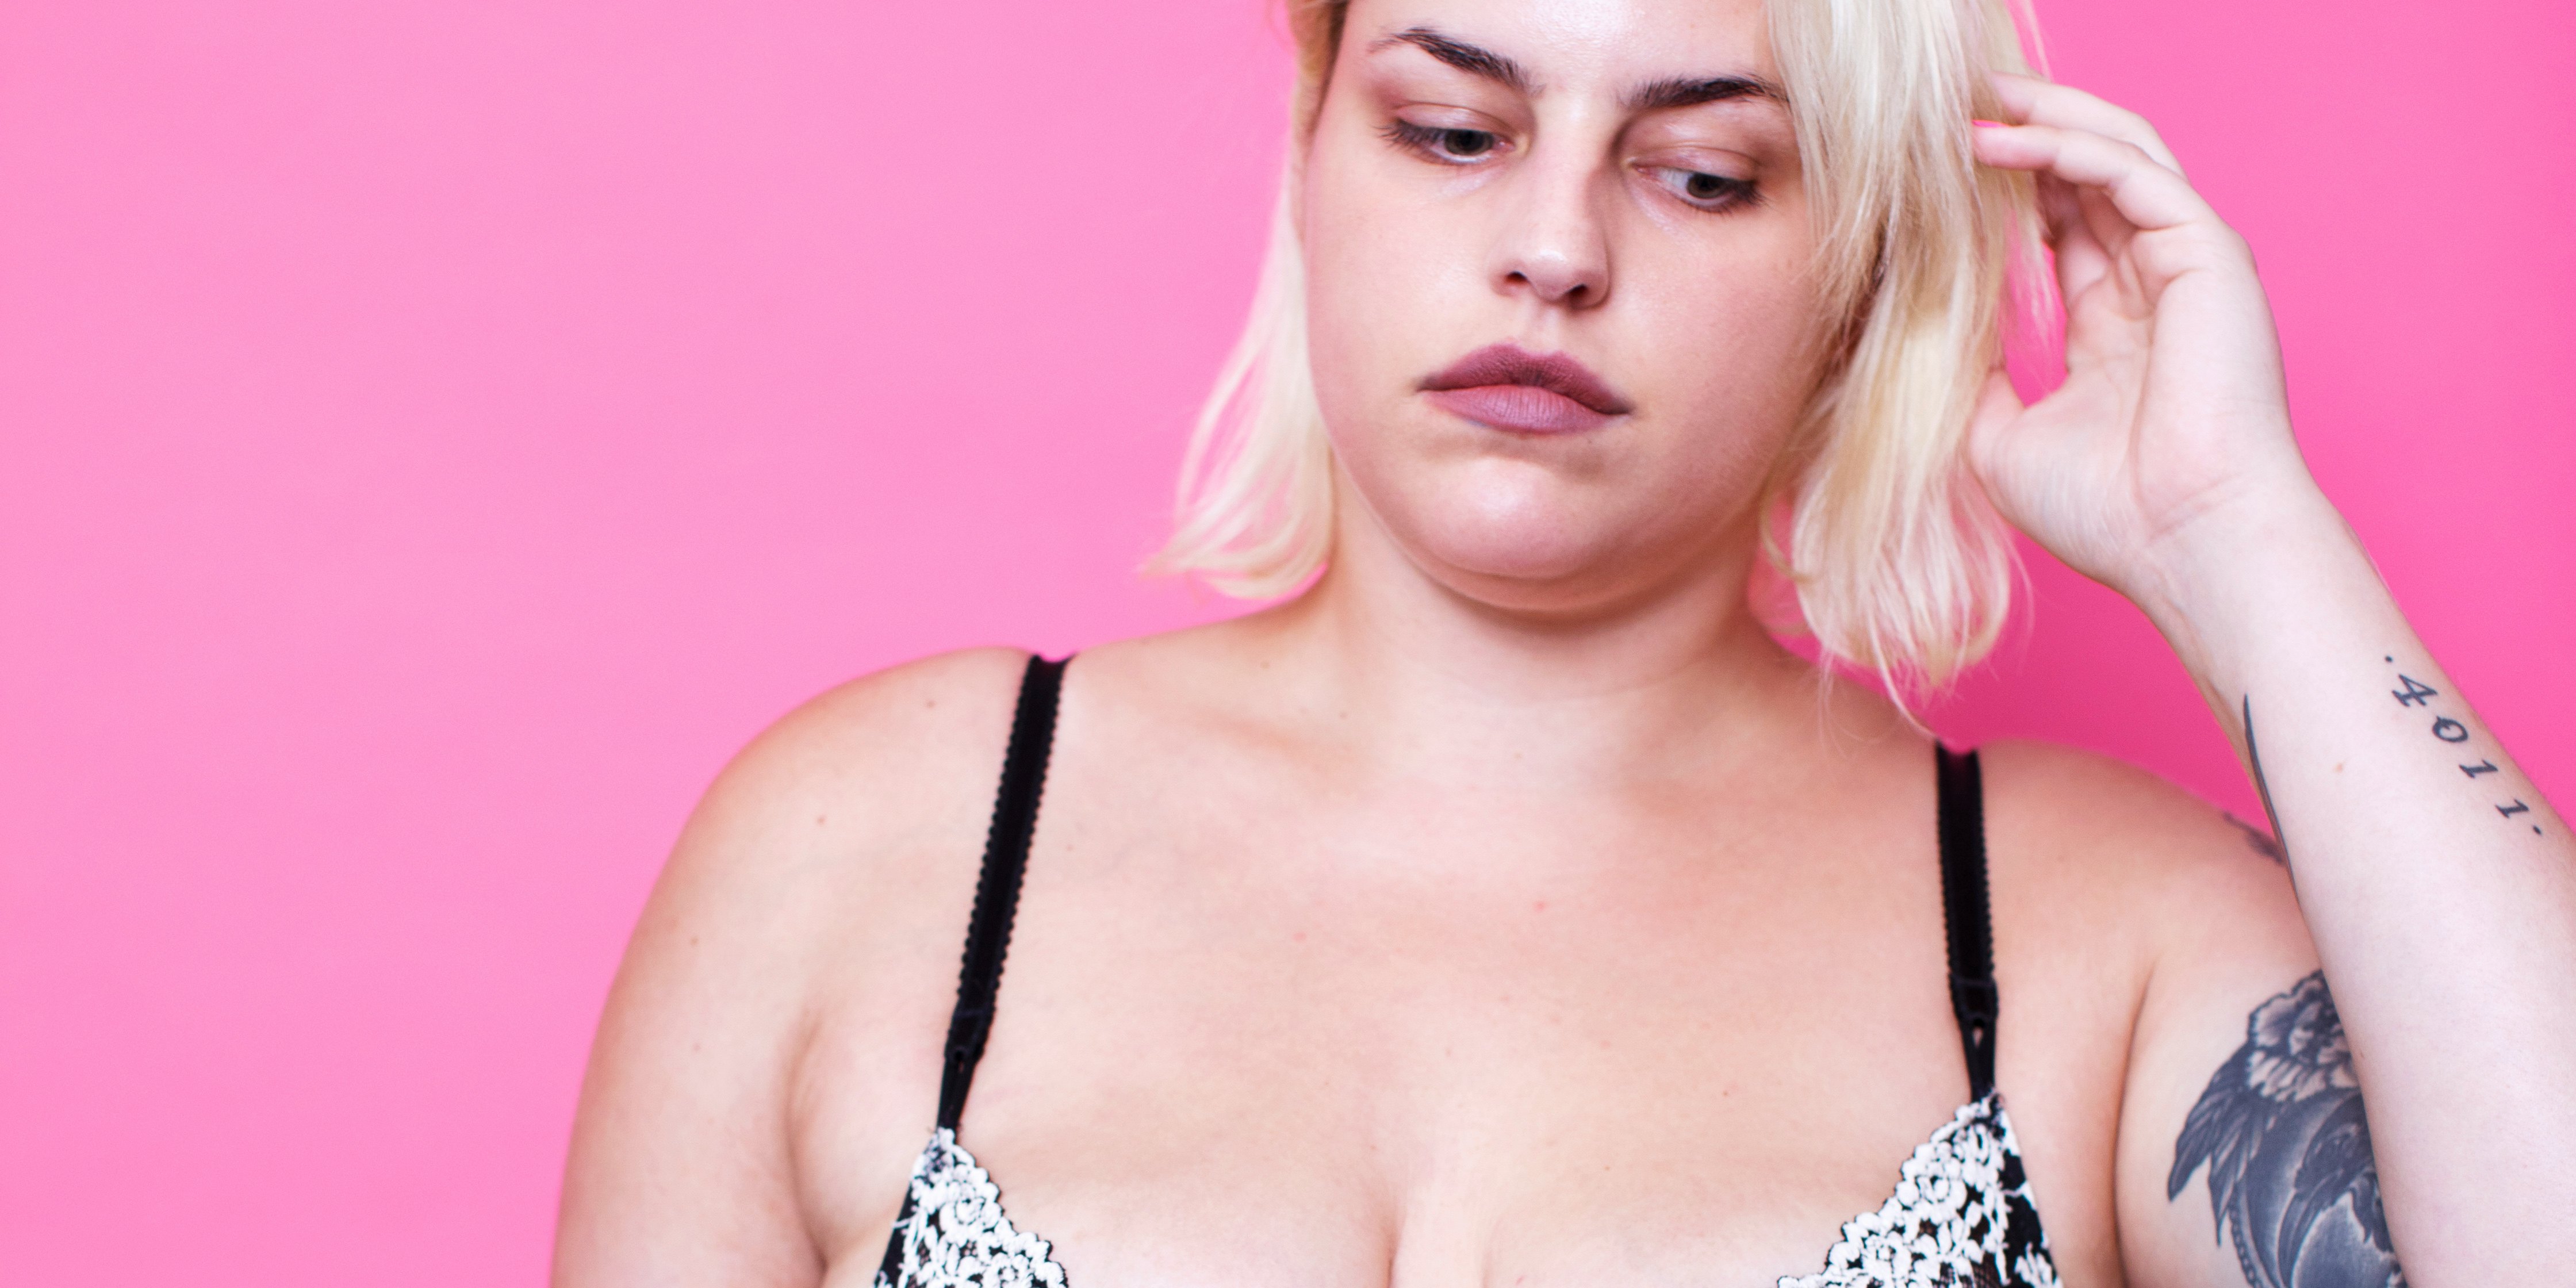 Women Who Cant Orgasm Reveal What Their Sex Lives Are Really Like pic